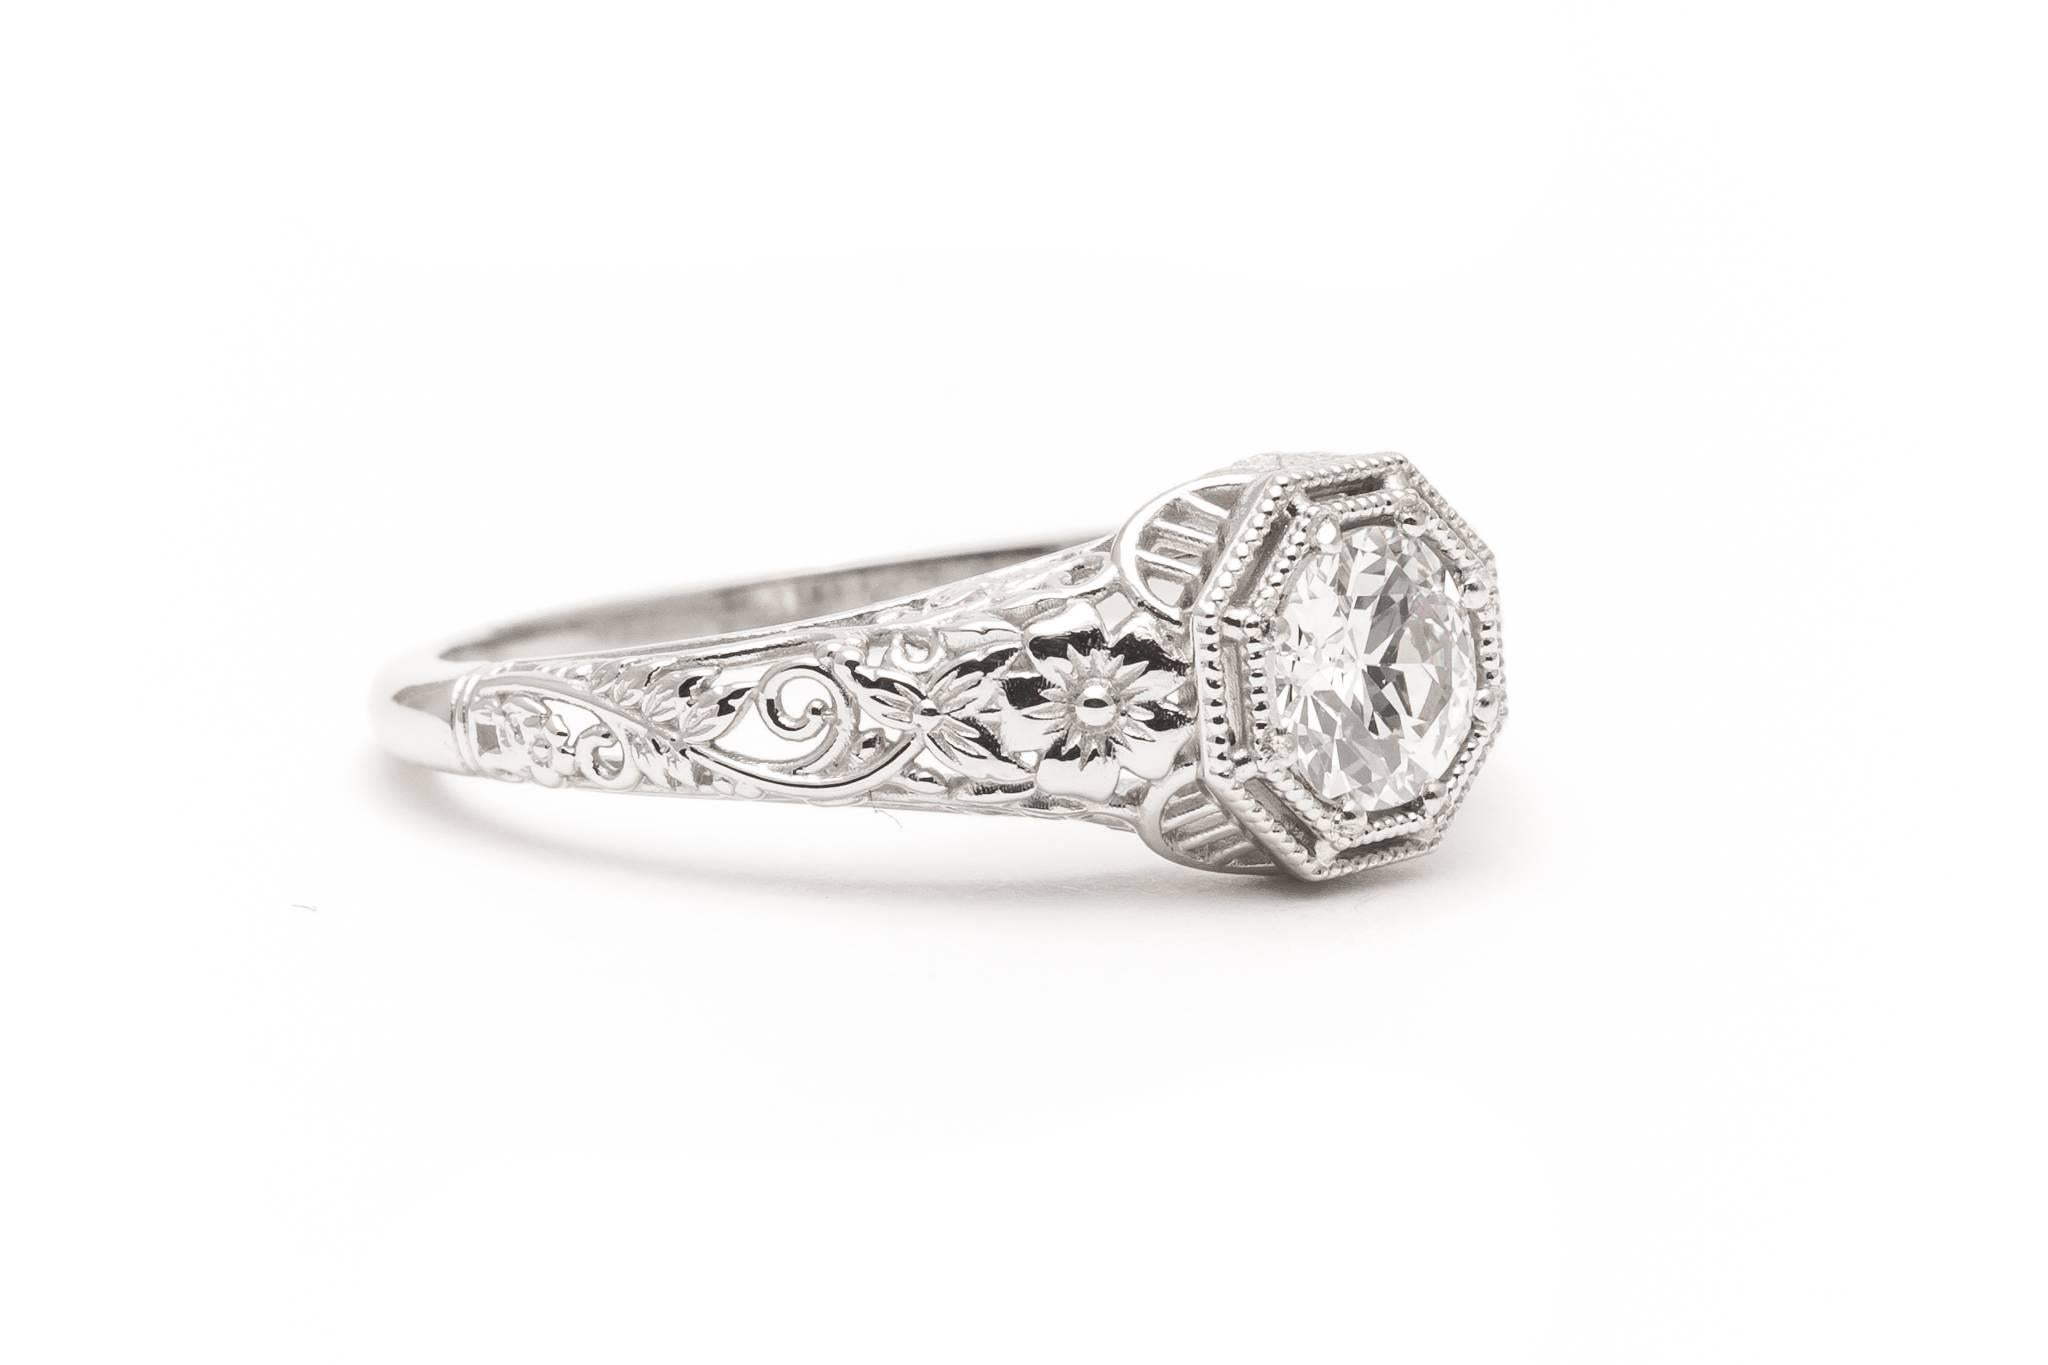 A stunning floral motif filigree ring in luxurious platinum.  Centered by a 0.52 carat antique European cut diamond this ring features exceptionally fine quality hand pierced filigree work and hand carved flowers throughout.

Grading as beautiful VS